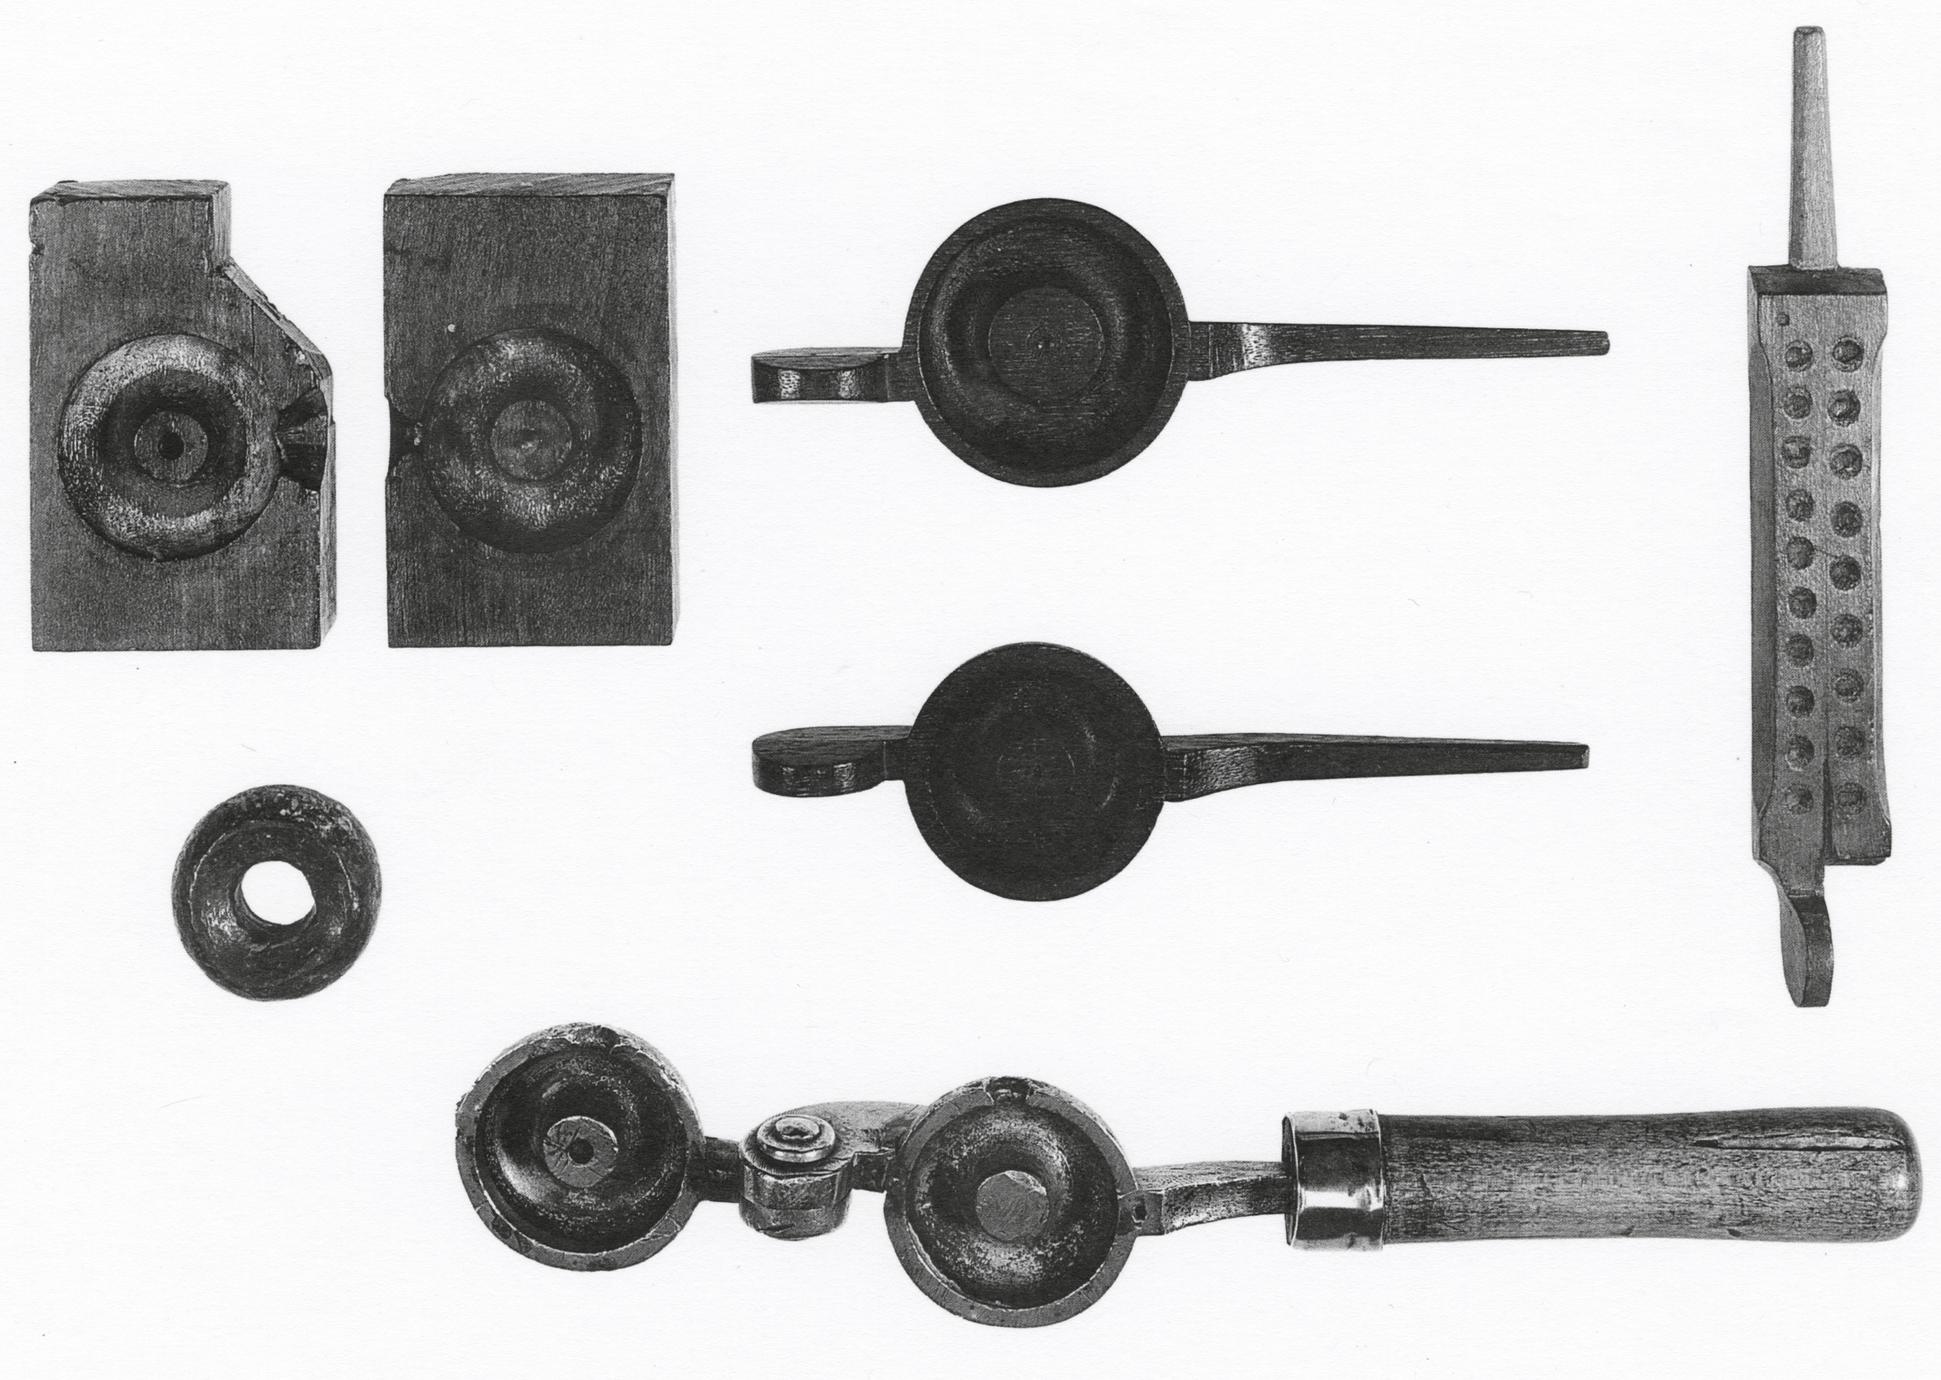 Black and white photograph of patterns for counterweight and seine net sinker molds, pattern for a shot mold, counterweight and seine net sinker, and counterwieght and seine net sinker mold.